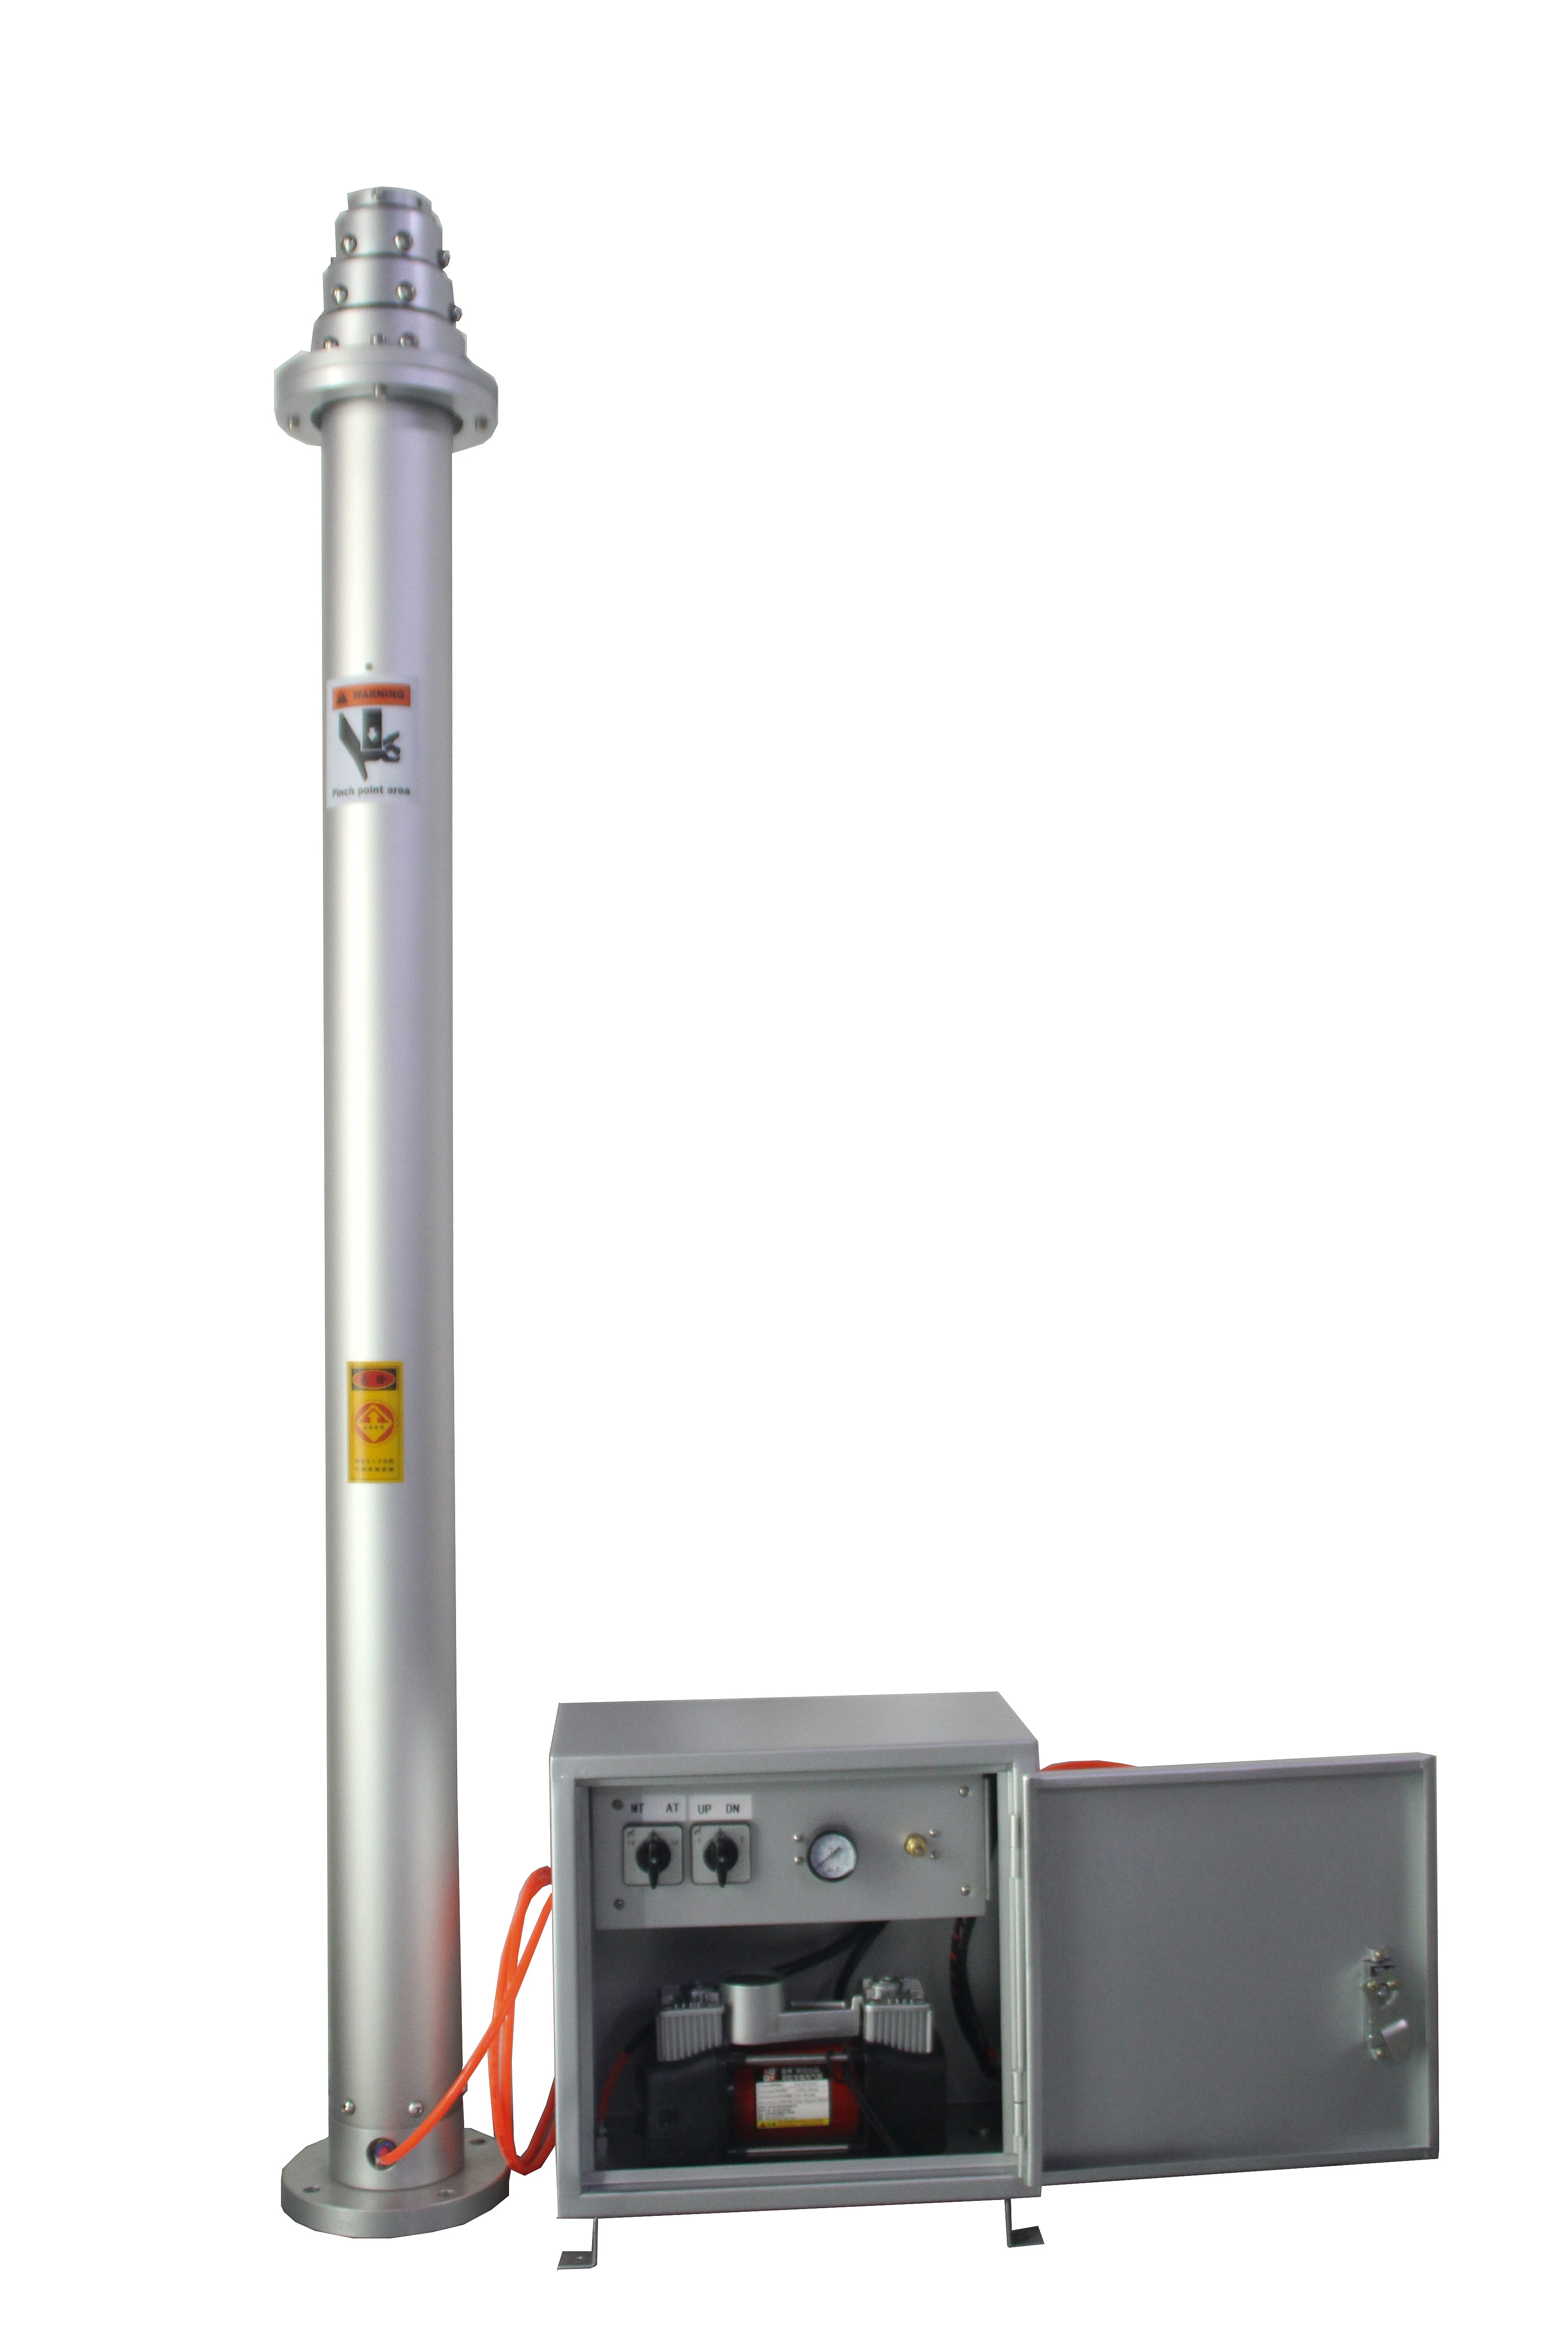 40ft 50ft 60ft 70ft 80ft 100ft RS485 controlled stable aluminum pneumatic telecommunication air mast for remote education